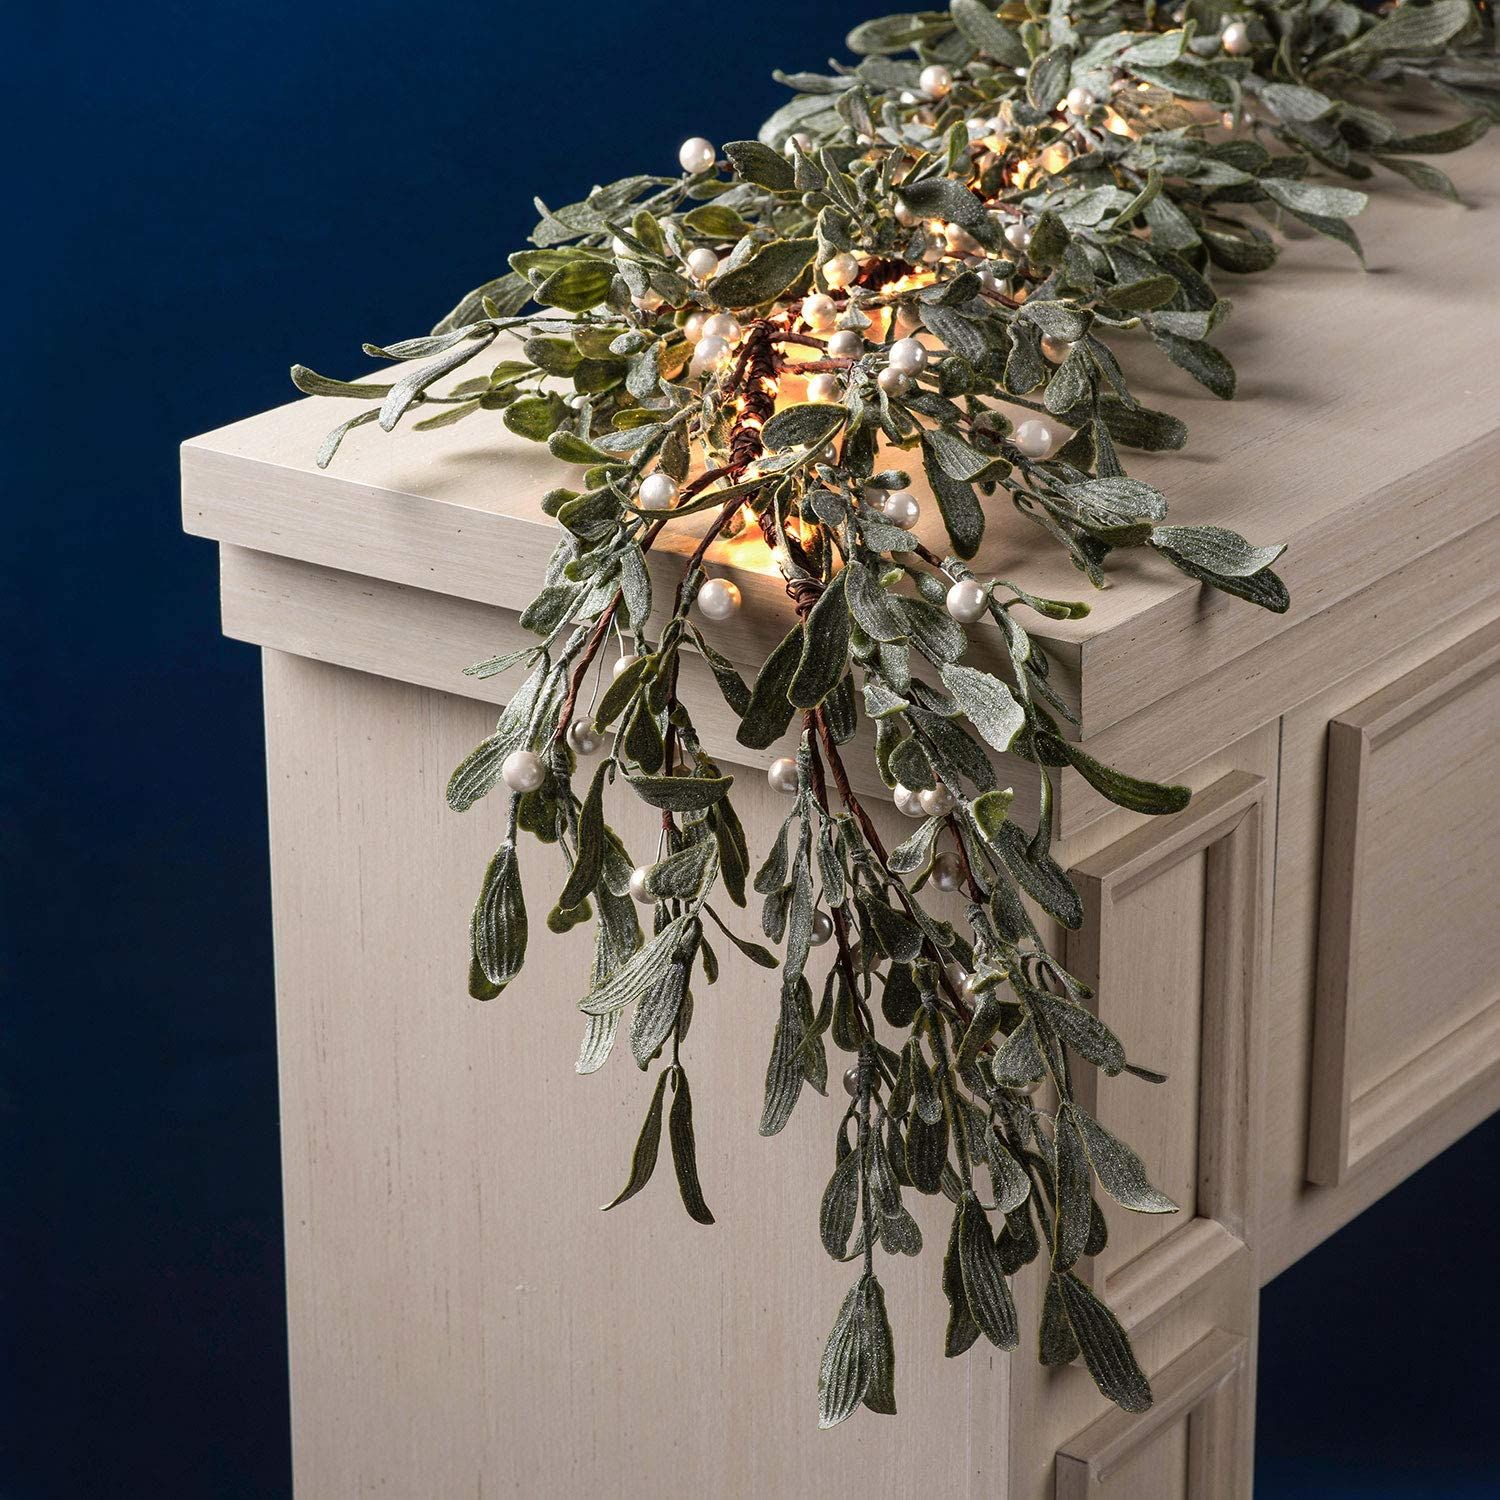 Amazon.com: Fall Garland for Mantle with Lights - 5 Ft, 100 White LED, Battery Operated, Frosted ... | Amazon (US)